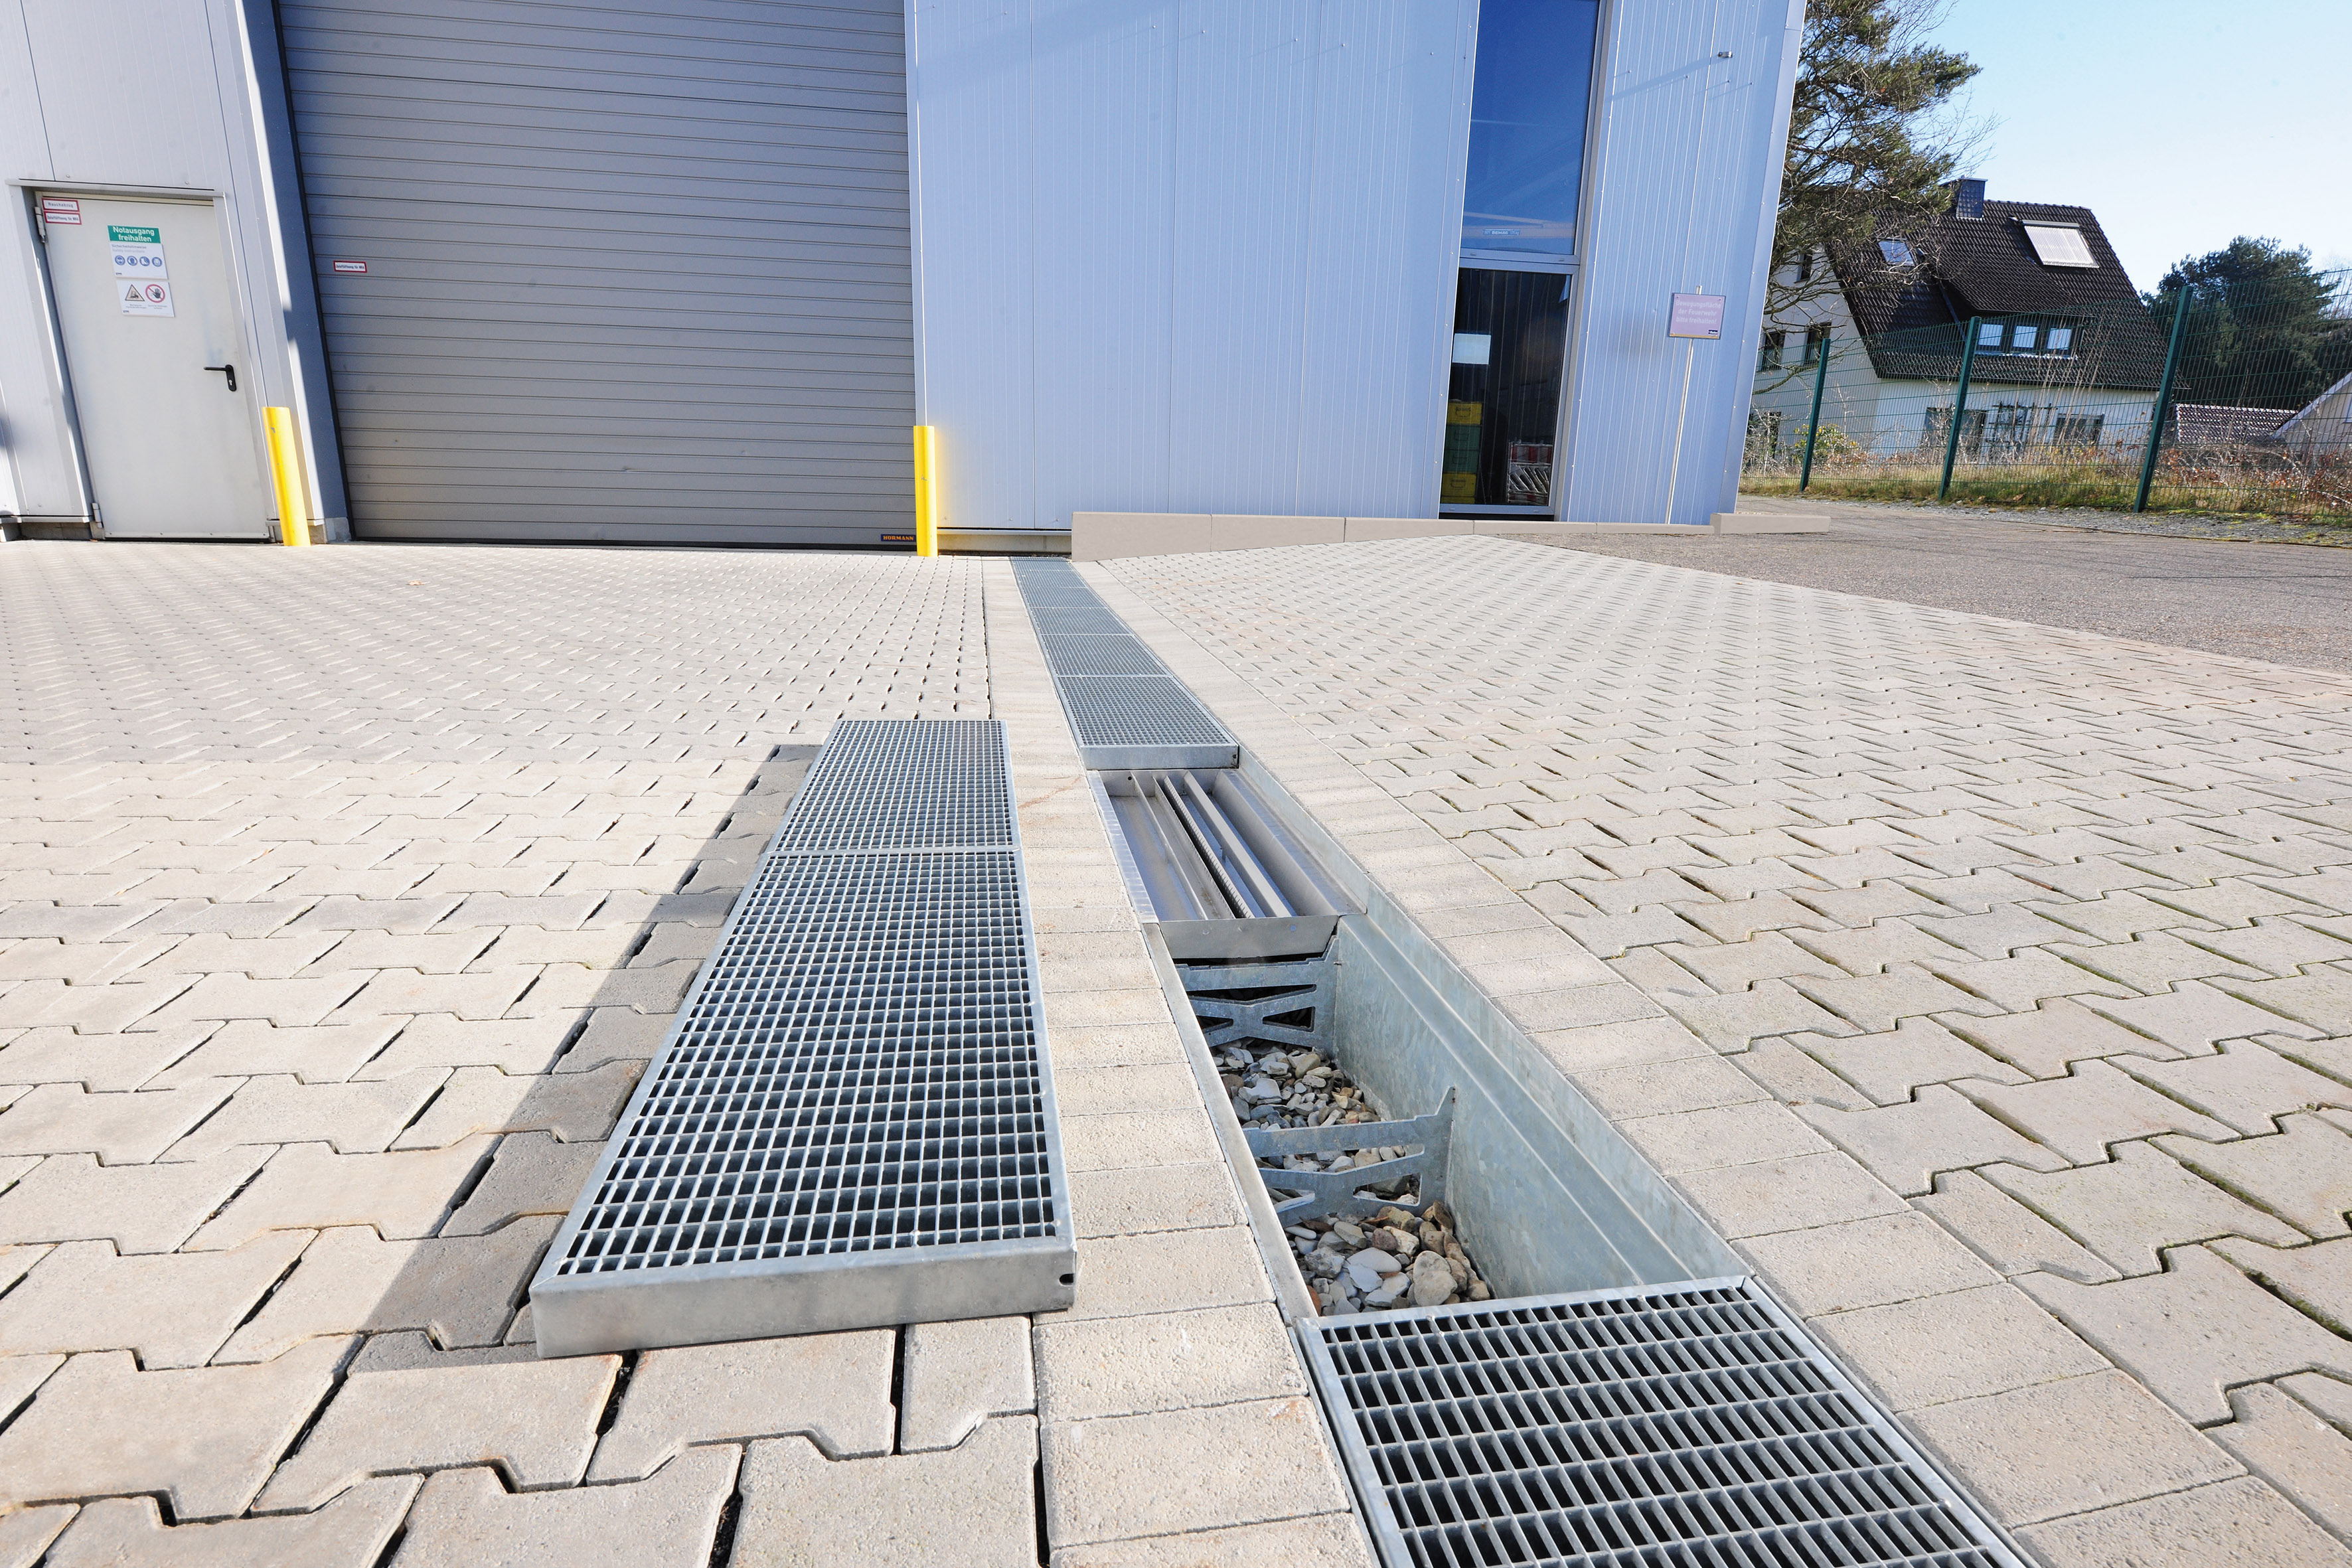 Permeable RigoMax gravel-filled drainage channels from the company Richard Brink were installed on the company premises of Parker Hannifin Manufacturing Germany GmbH & Co. KG.